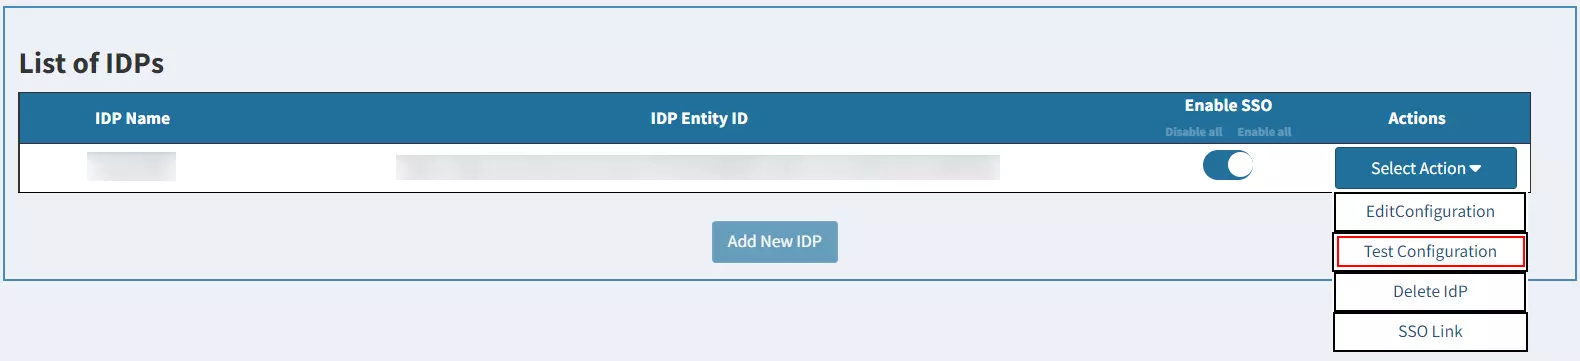 nopCommerce Single Sign-On (SSO) using ADFS as IDP - Click on Test Configuration